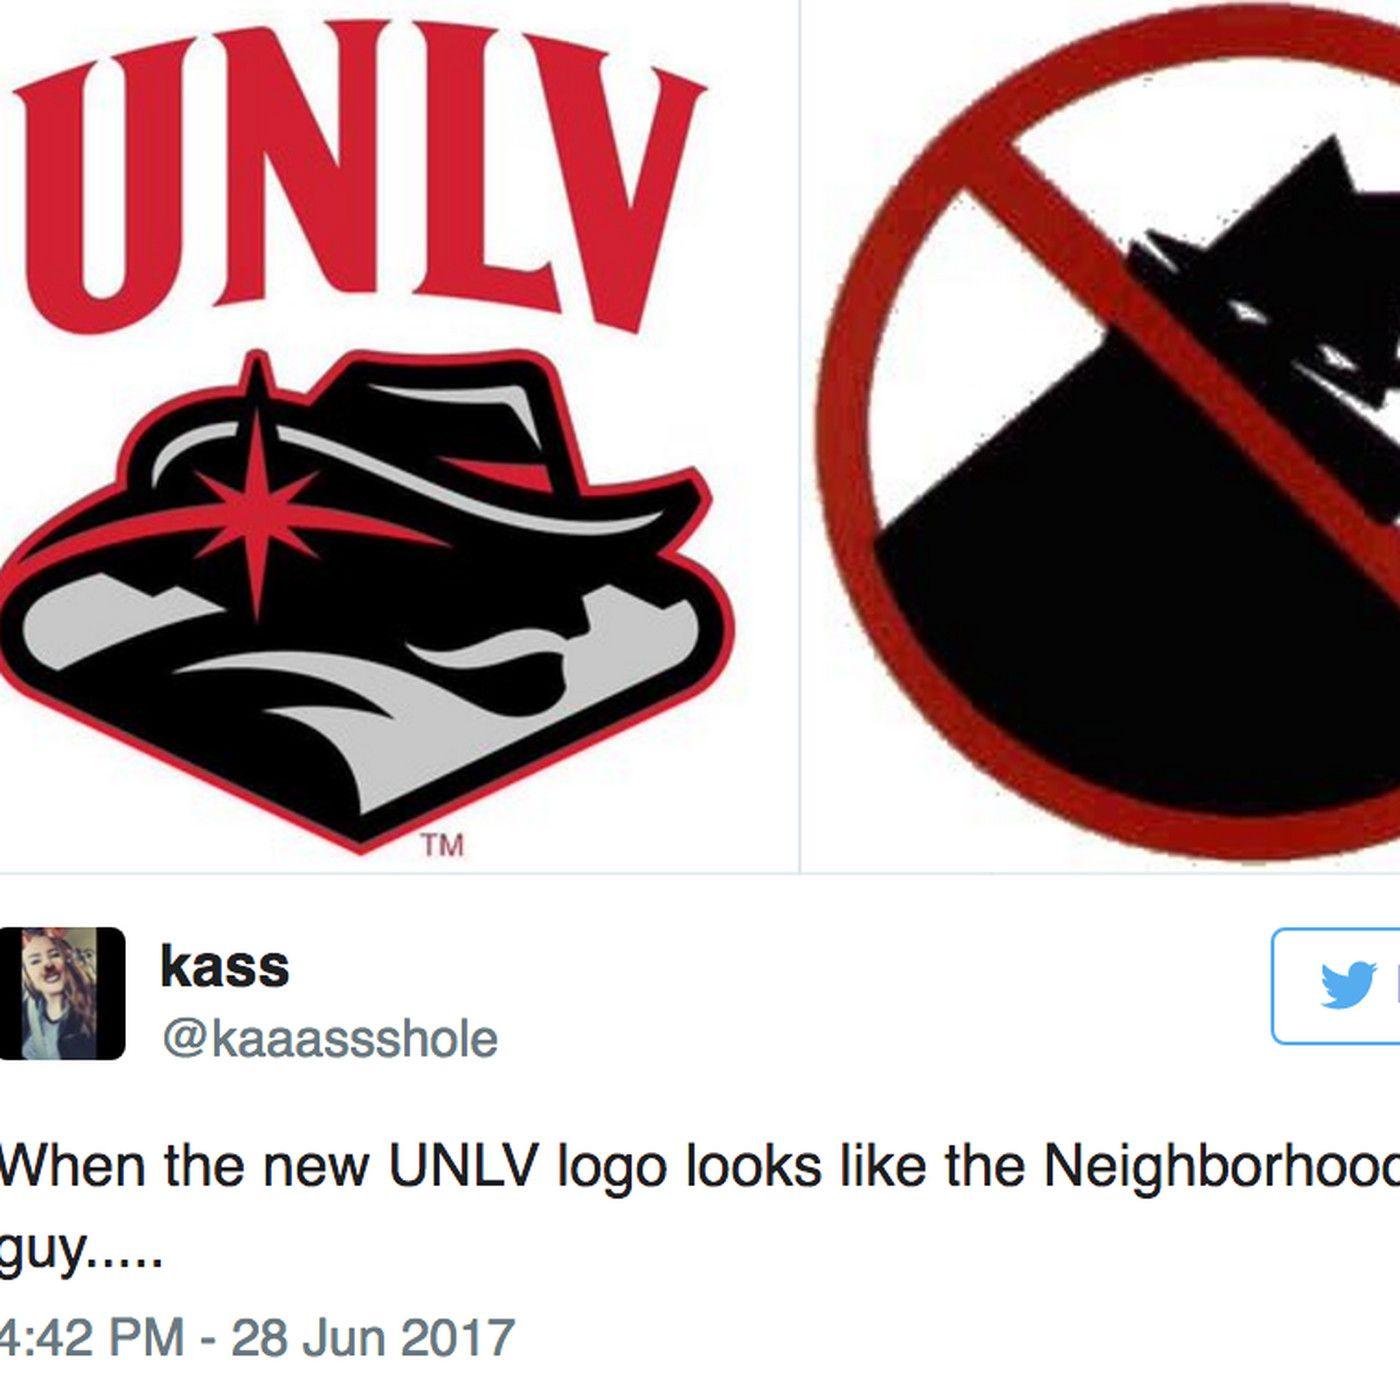 UNLV Logo - What does UNLV's complicated new logo look like to you? - SBNation.com